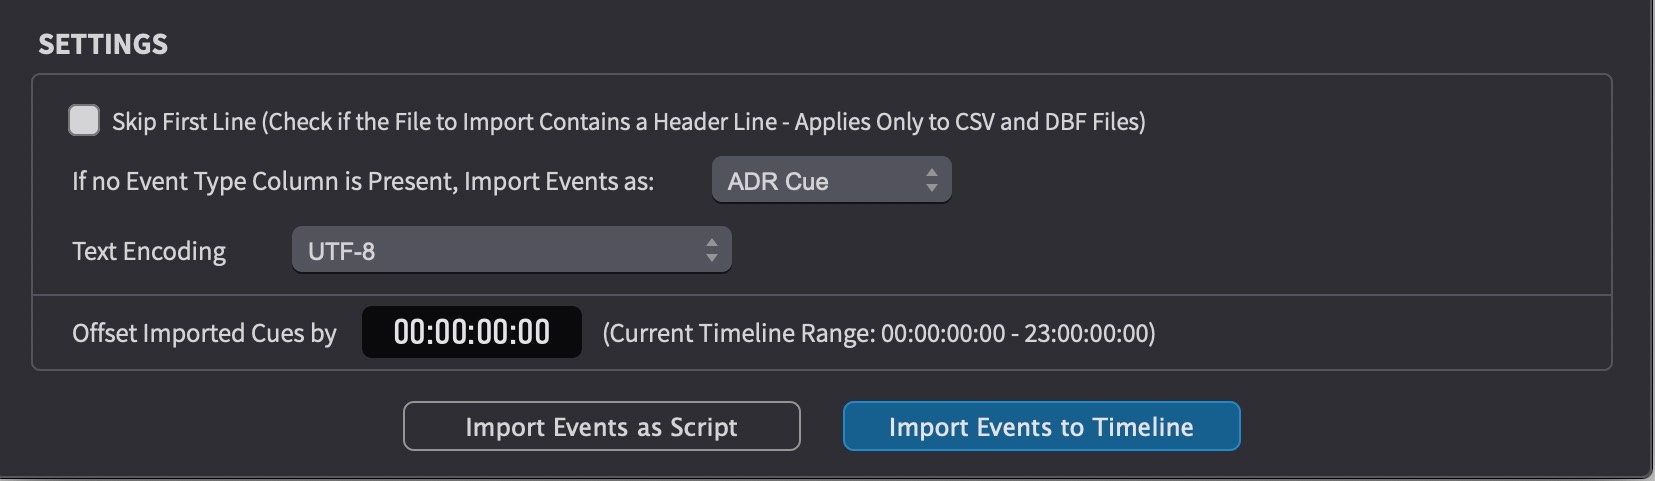 Import Visual Events - settings section